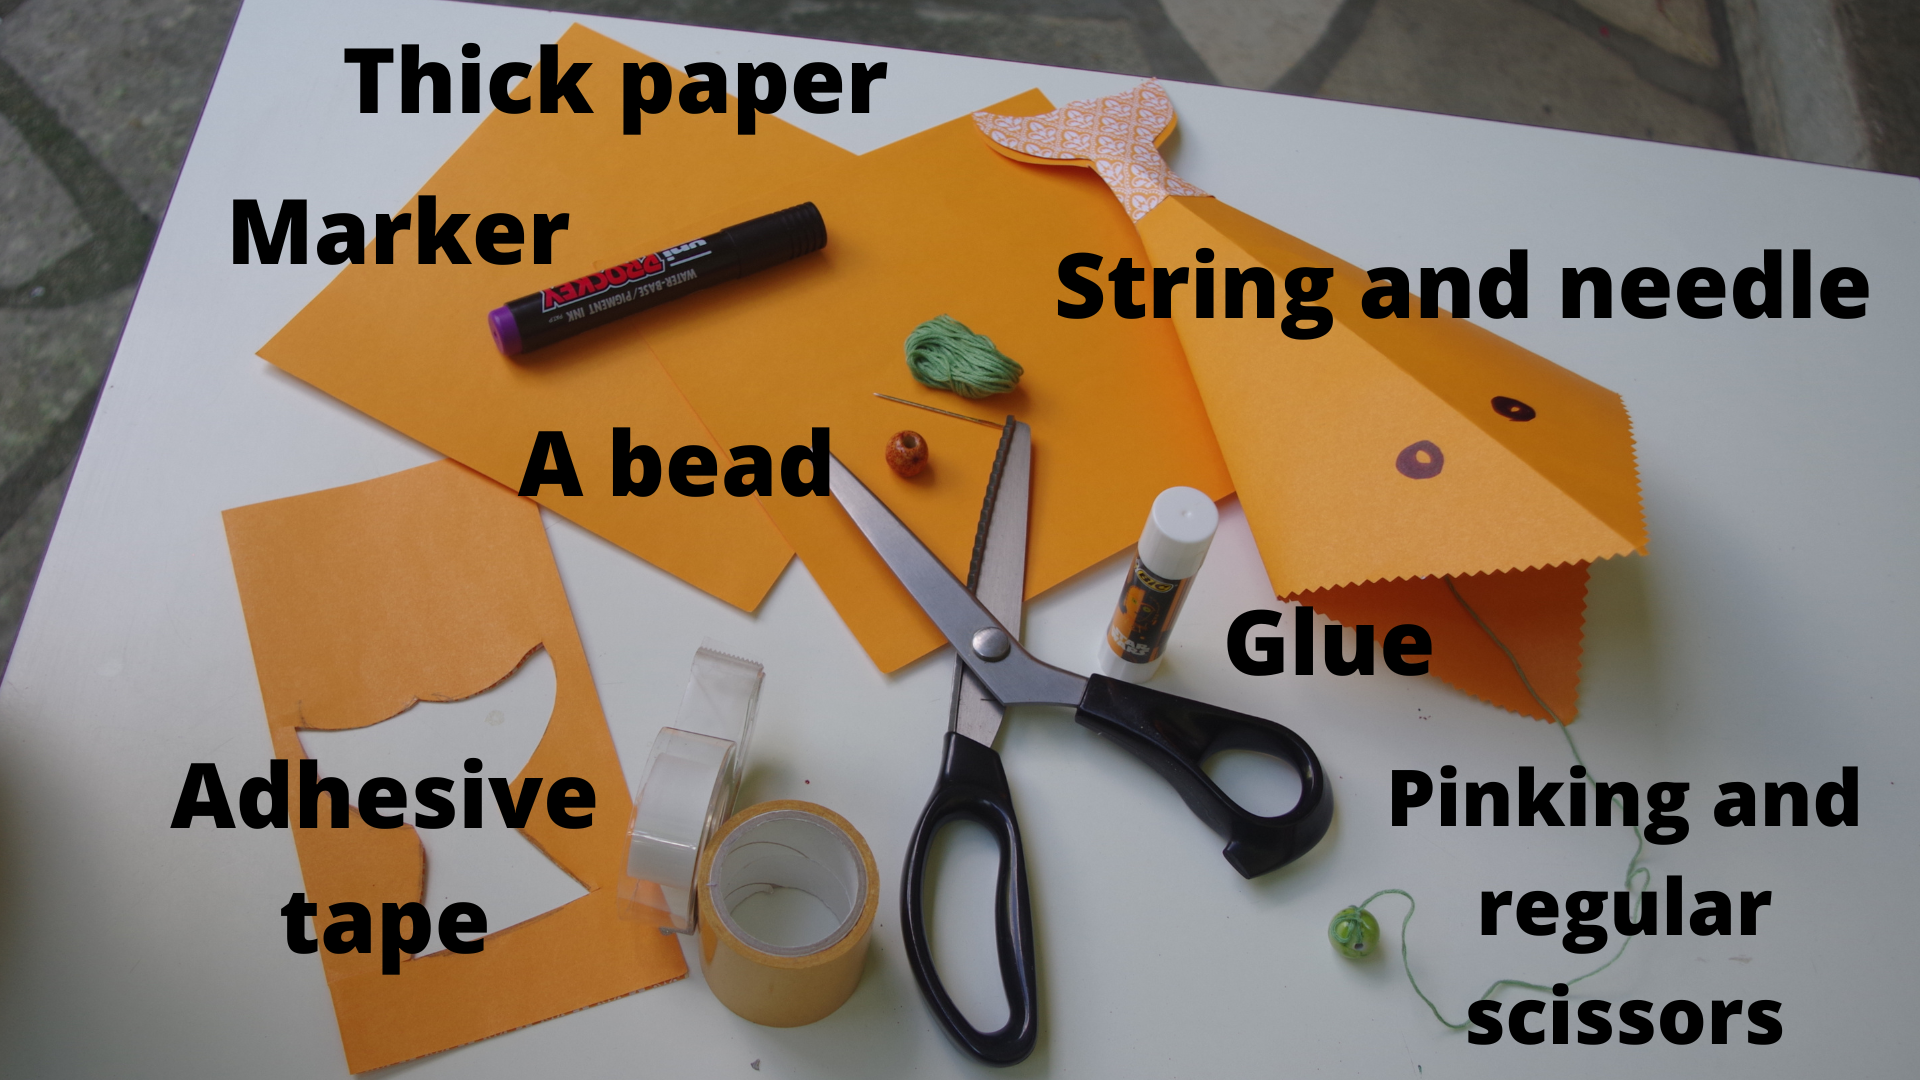 Supplies for the project are arrayed on a white surface, including orange paper, a pair of scissors, a bear, string with a large needle, adhesive tape, glue, and a marker